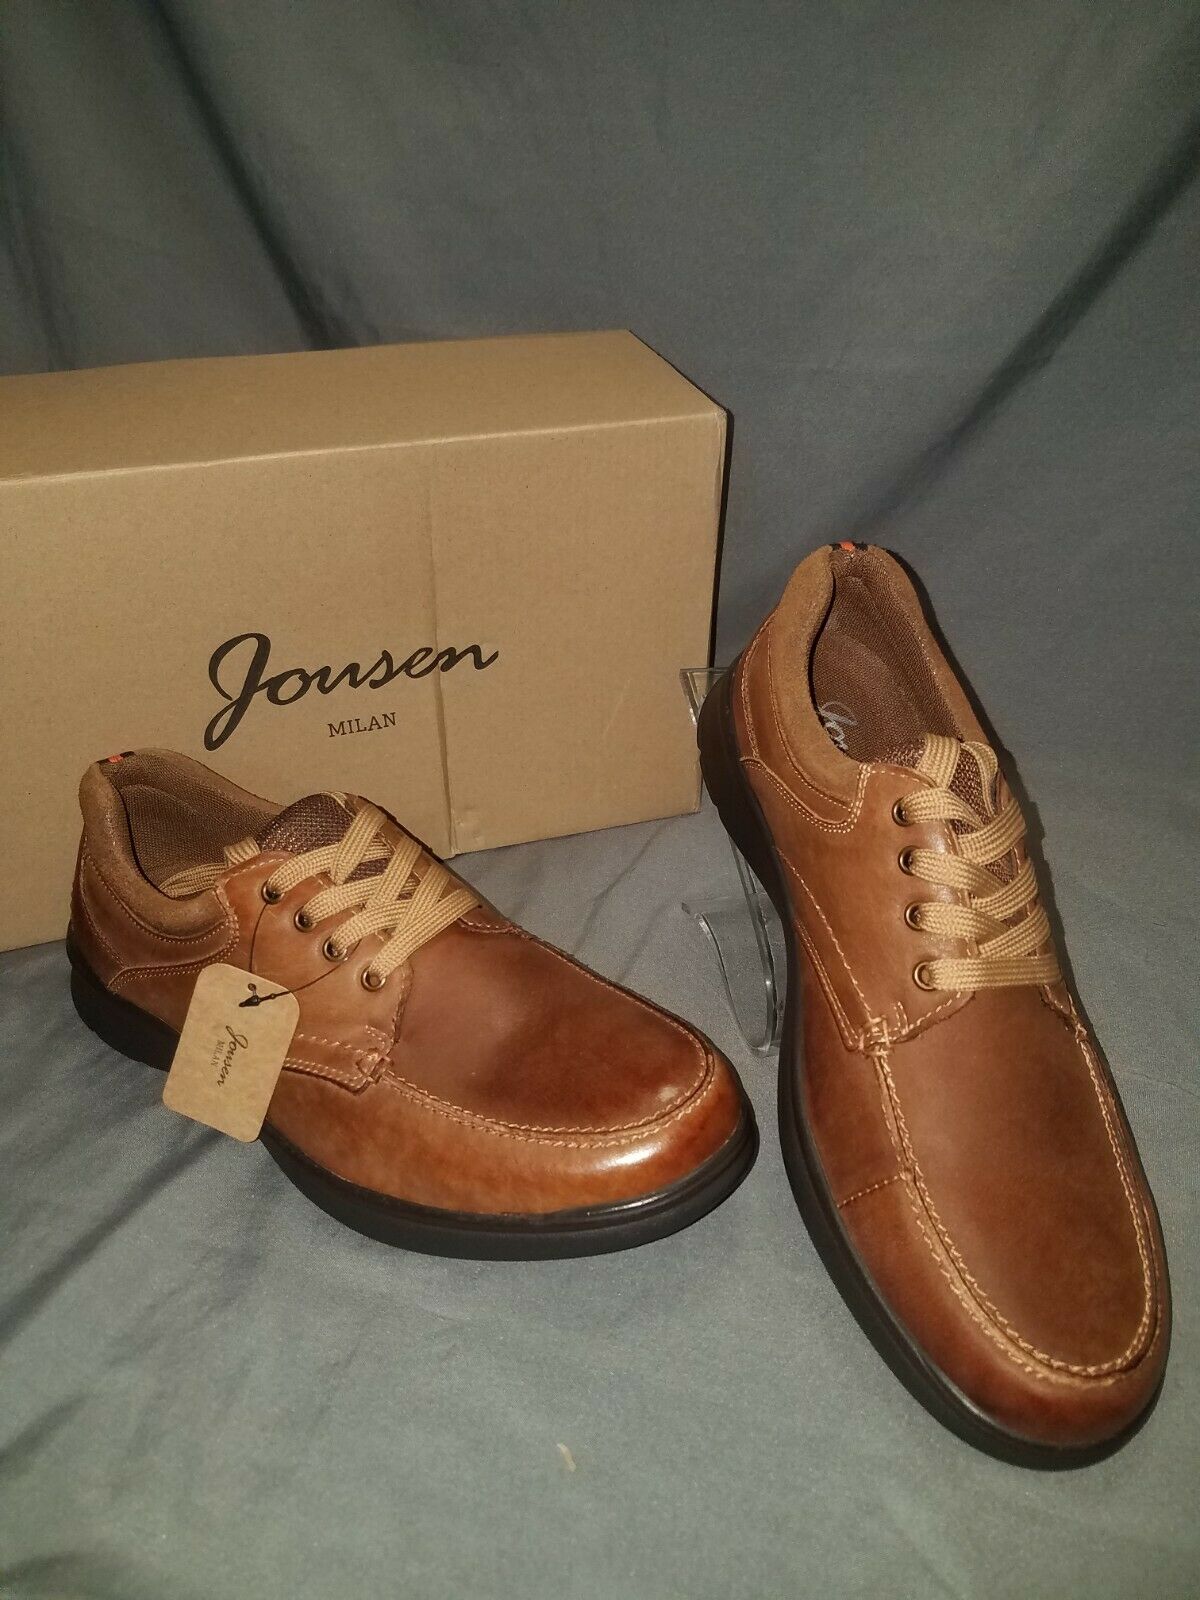 Jousen Mens My611a Brown Oxford Dress Shoe Size 9.5 New Casual Shoes